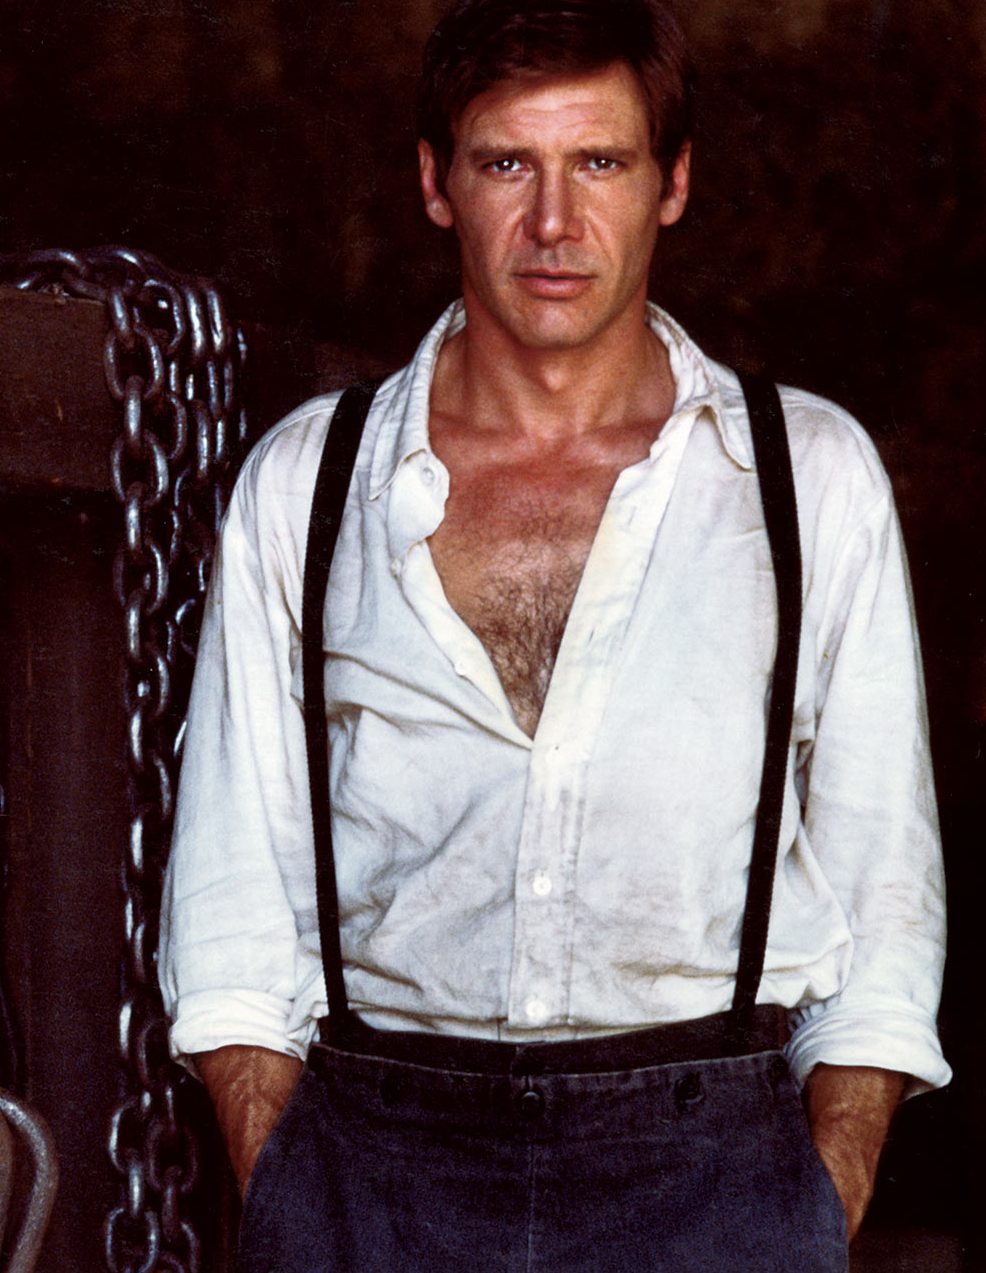 14. Harrison Ford took part in real police raids to prepare for the film.